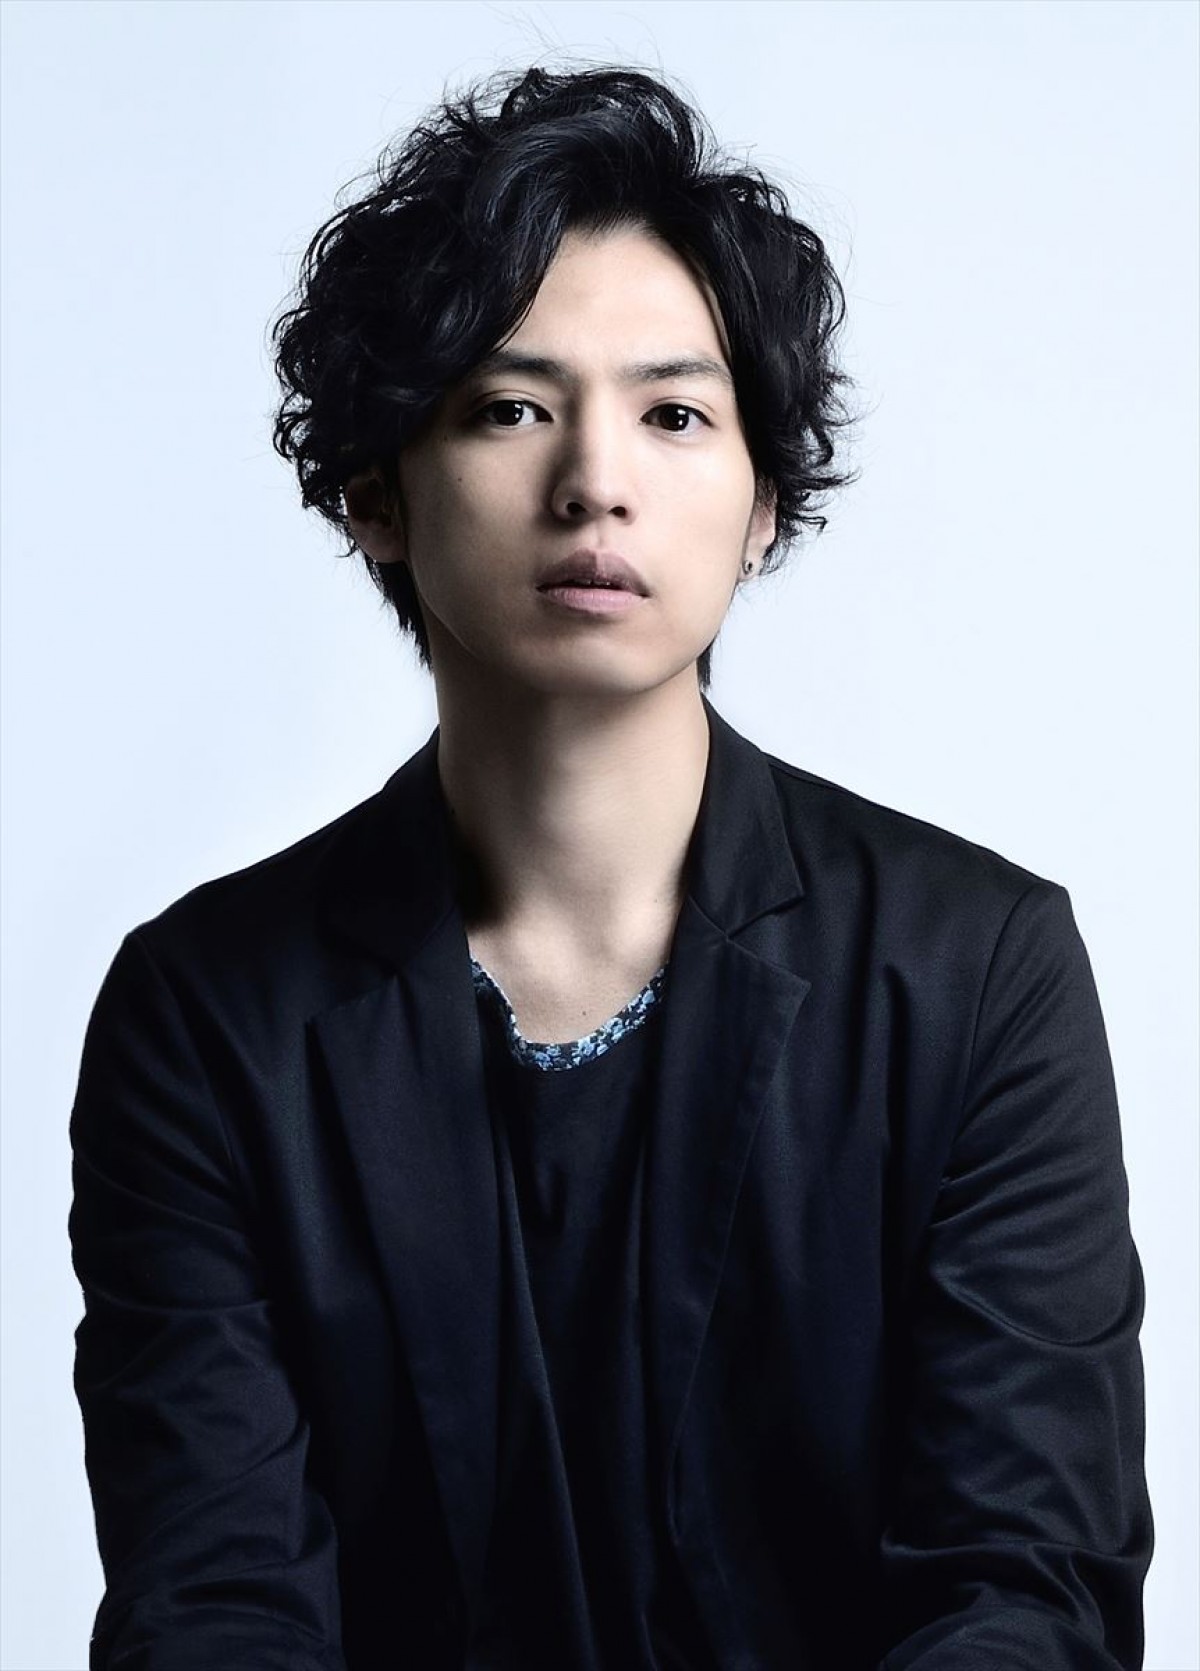 NEWS加藤シゲアキ、著書の初ドラマ化決定！　主演・桐山漣の幼なじみ役として出演